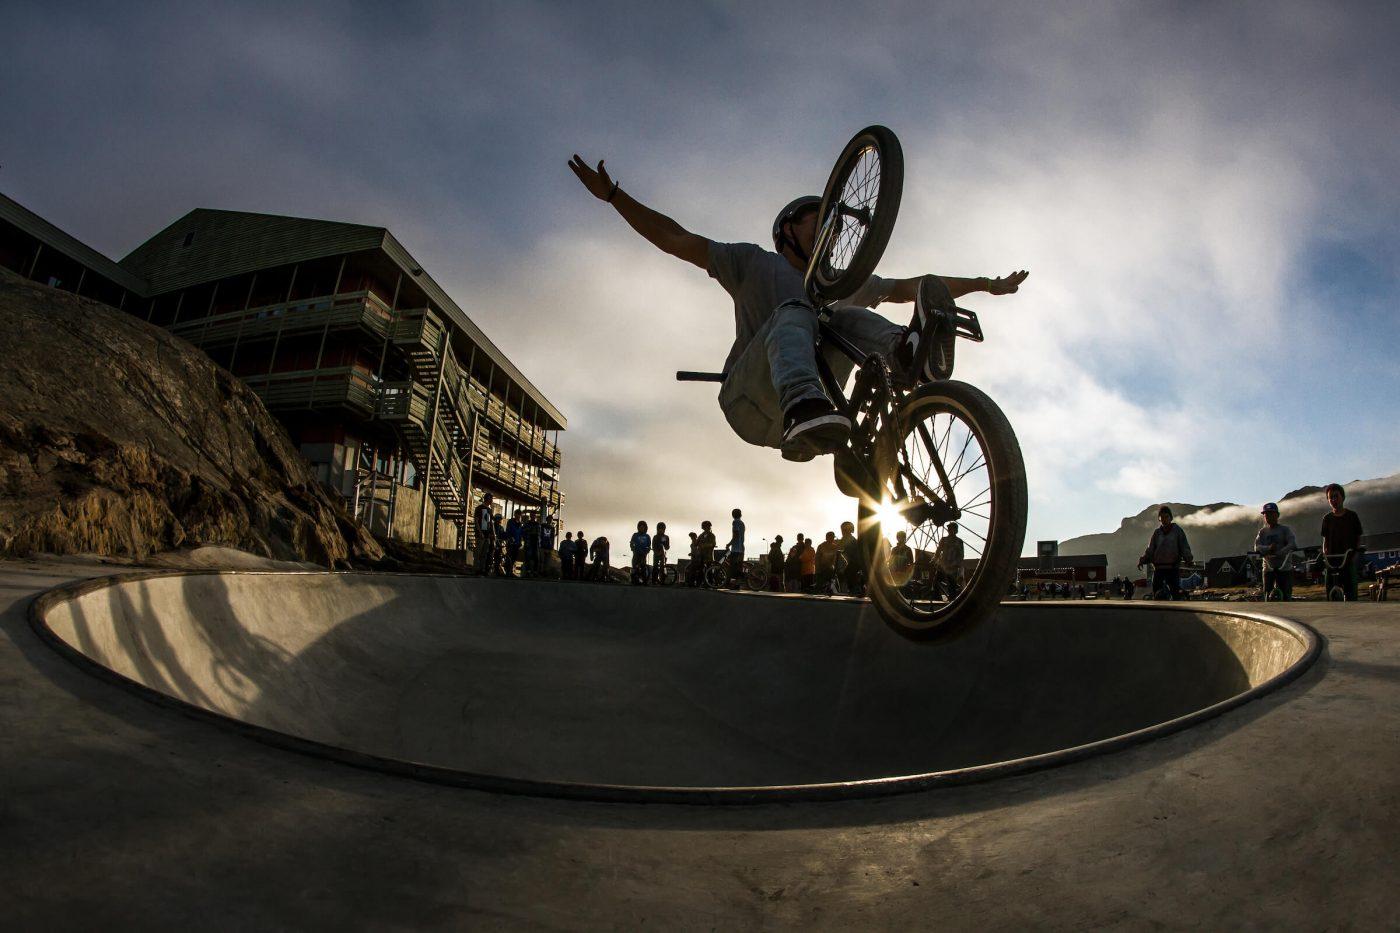 Local BMX hero Inuk Siegstad in the Sisimiut skate bowl in Greenland. Photo by Mads Pihl